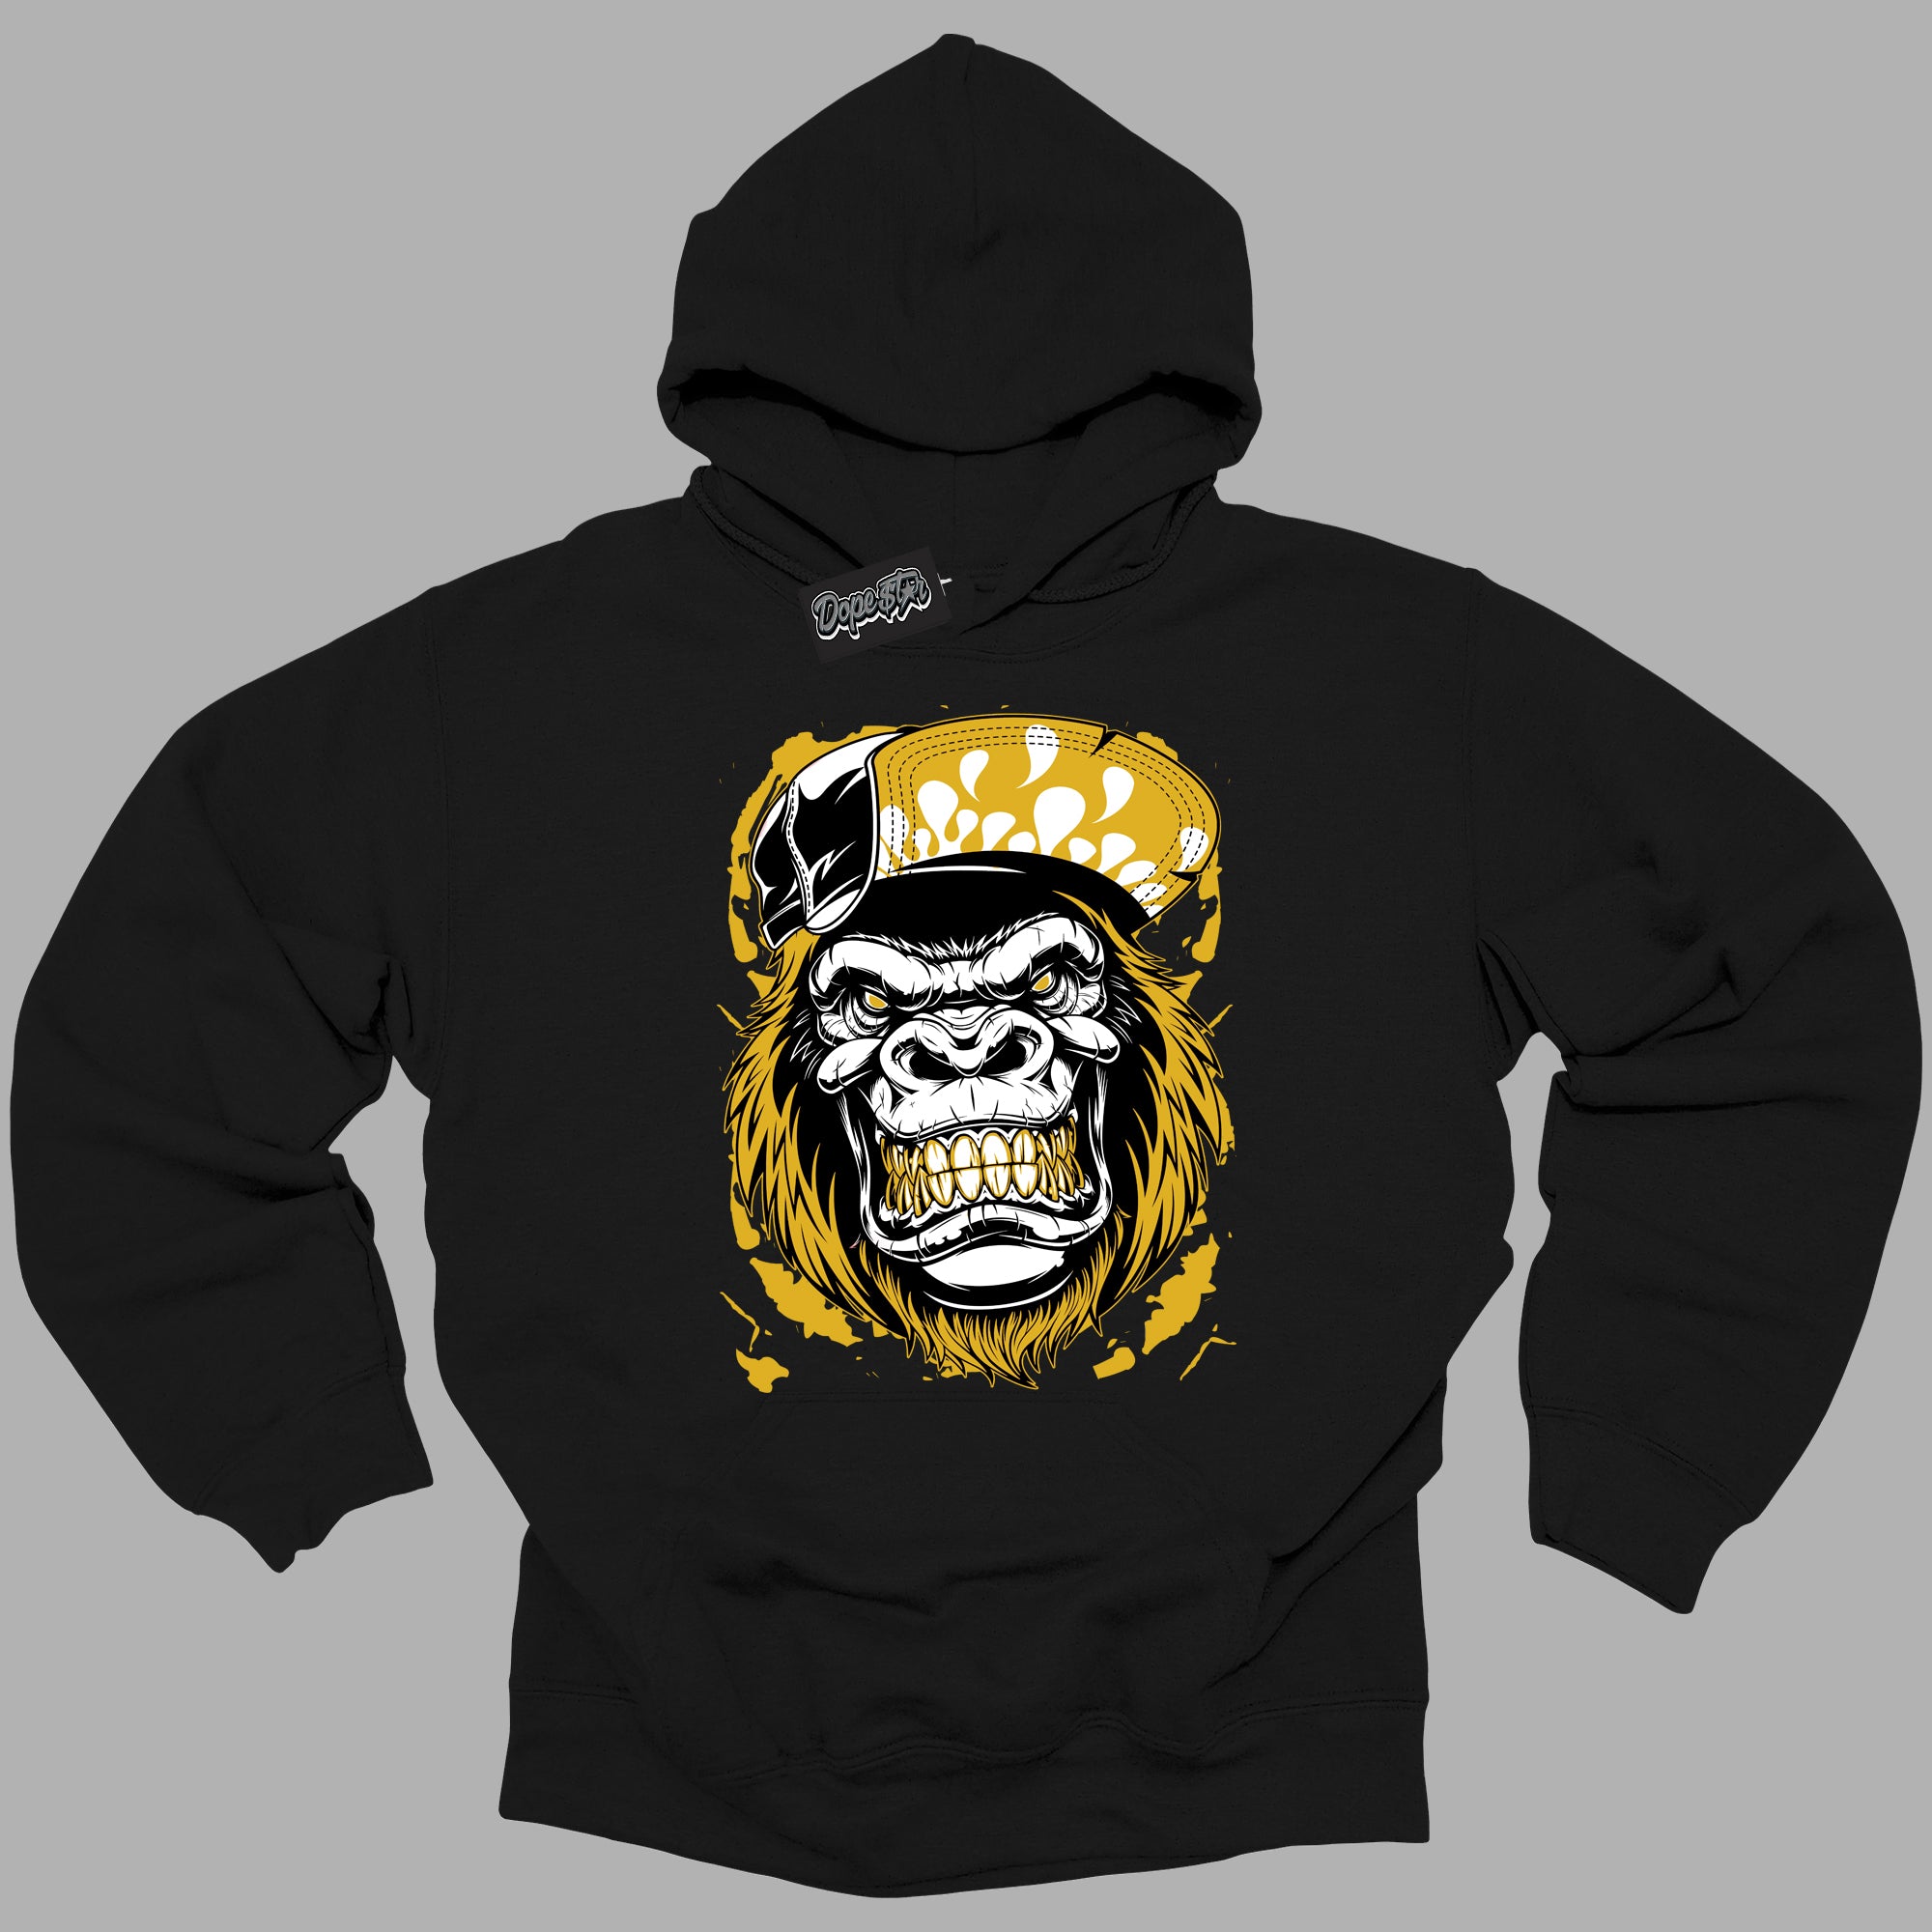 Cool Black Hoodie with “ Gorilla Beast ”  design that Perfectly Matches Yellow Ochre 6s Sneakers.